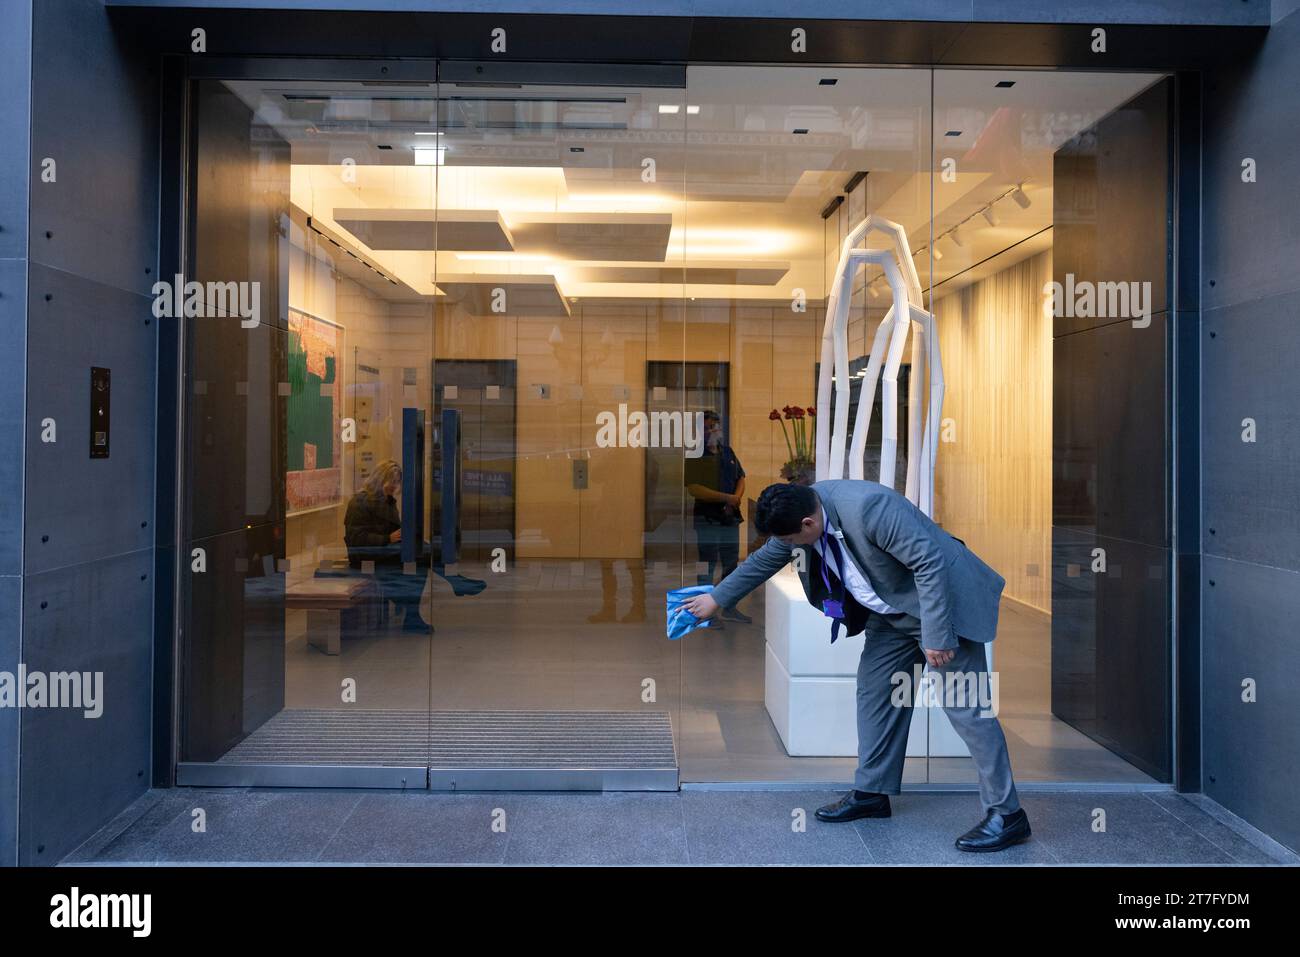 An office worker cleans the windows of a commercial building entrance on New Bond Street, Mayfair, London, UK Stock Photo